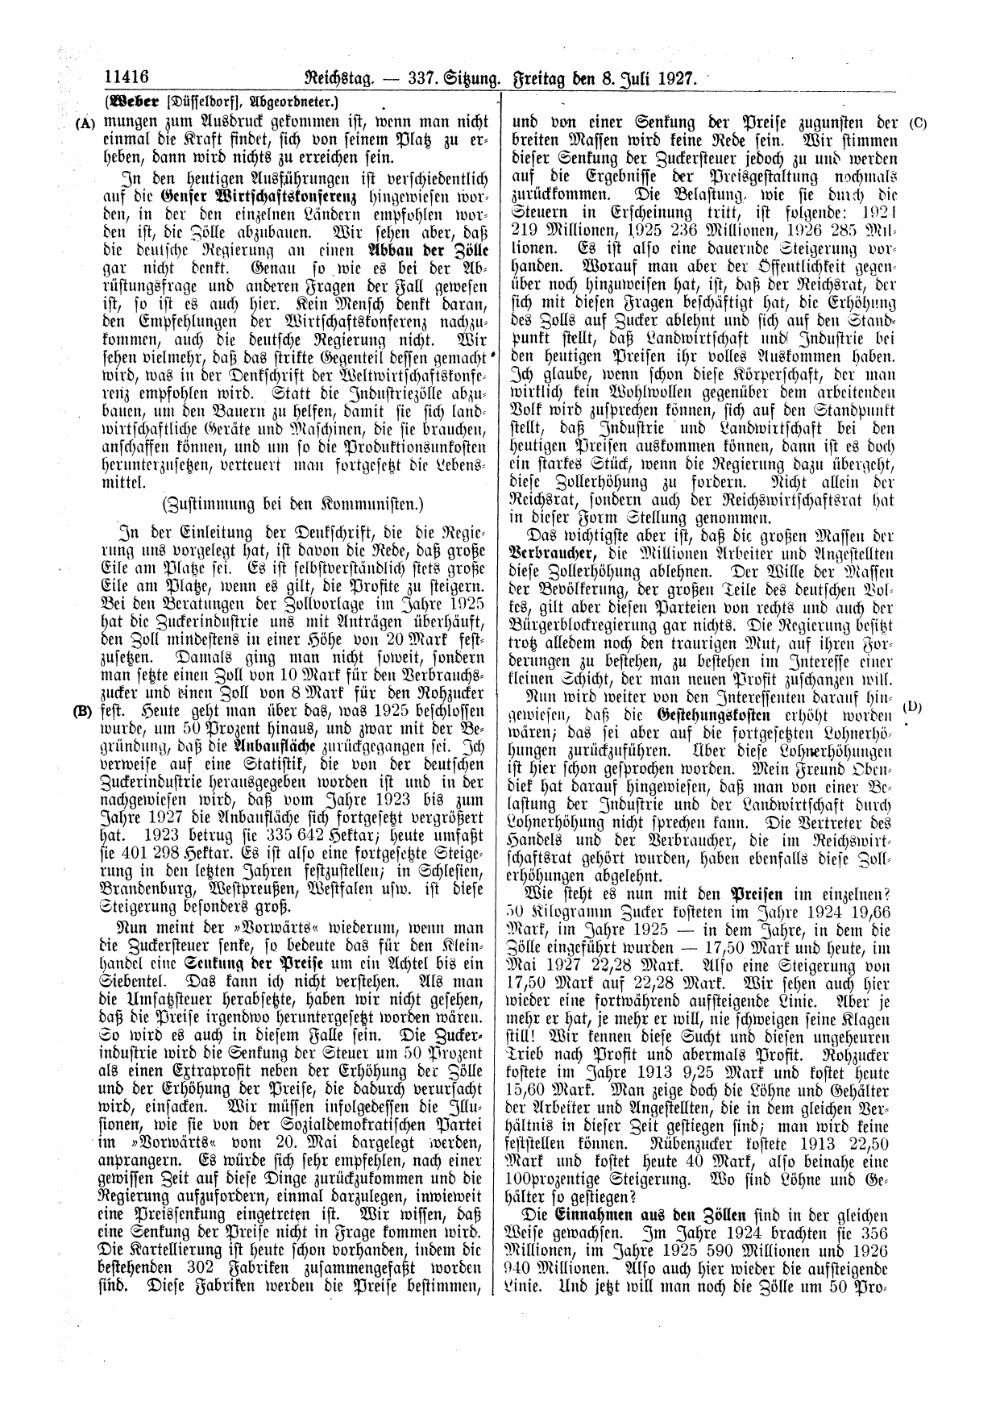 Scan of page 11416